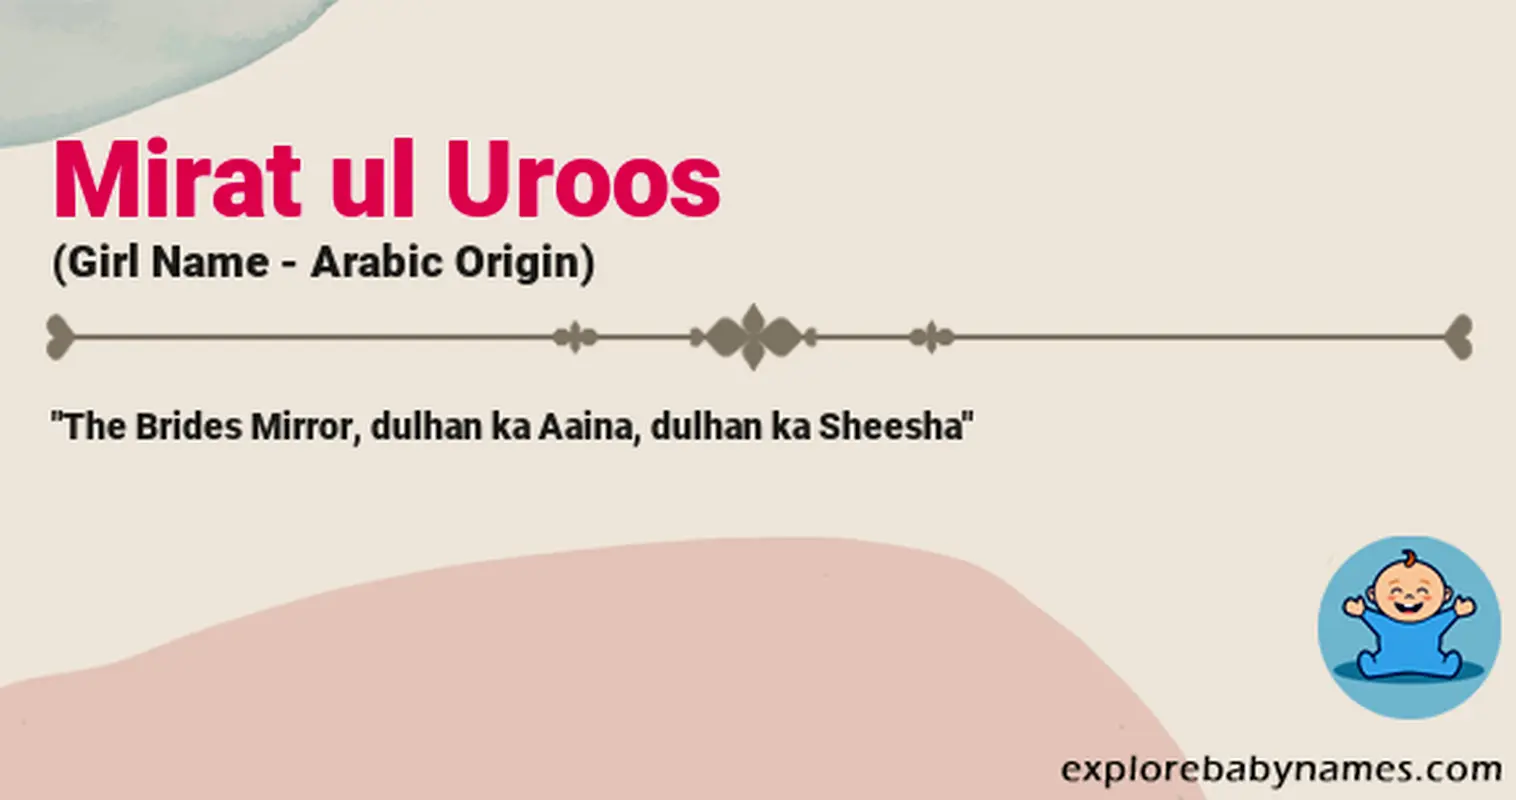 Meaning of Mirat ul Uroos